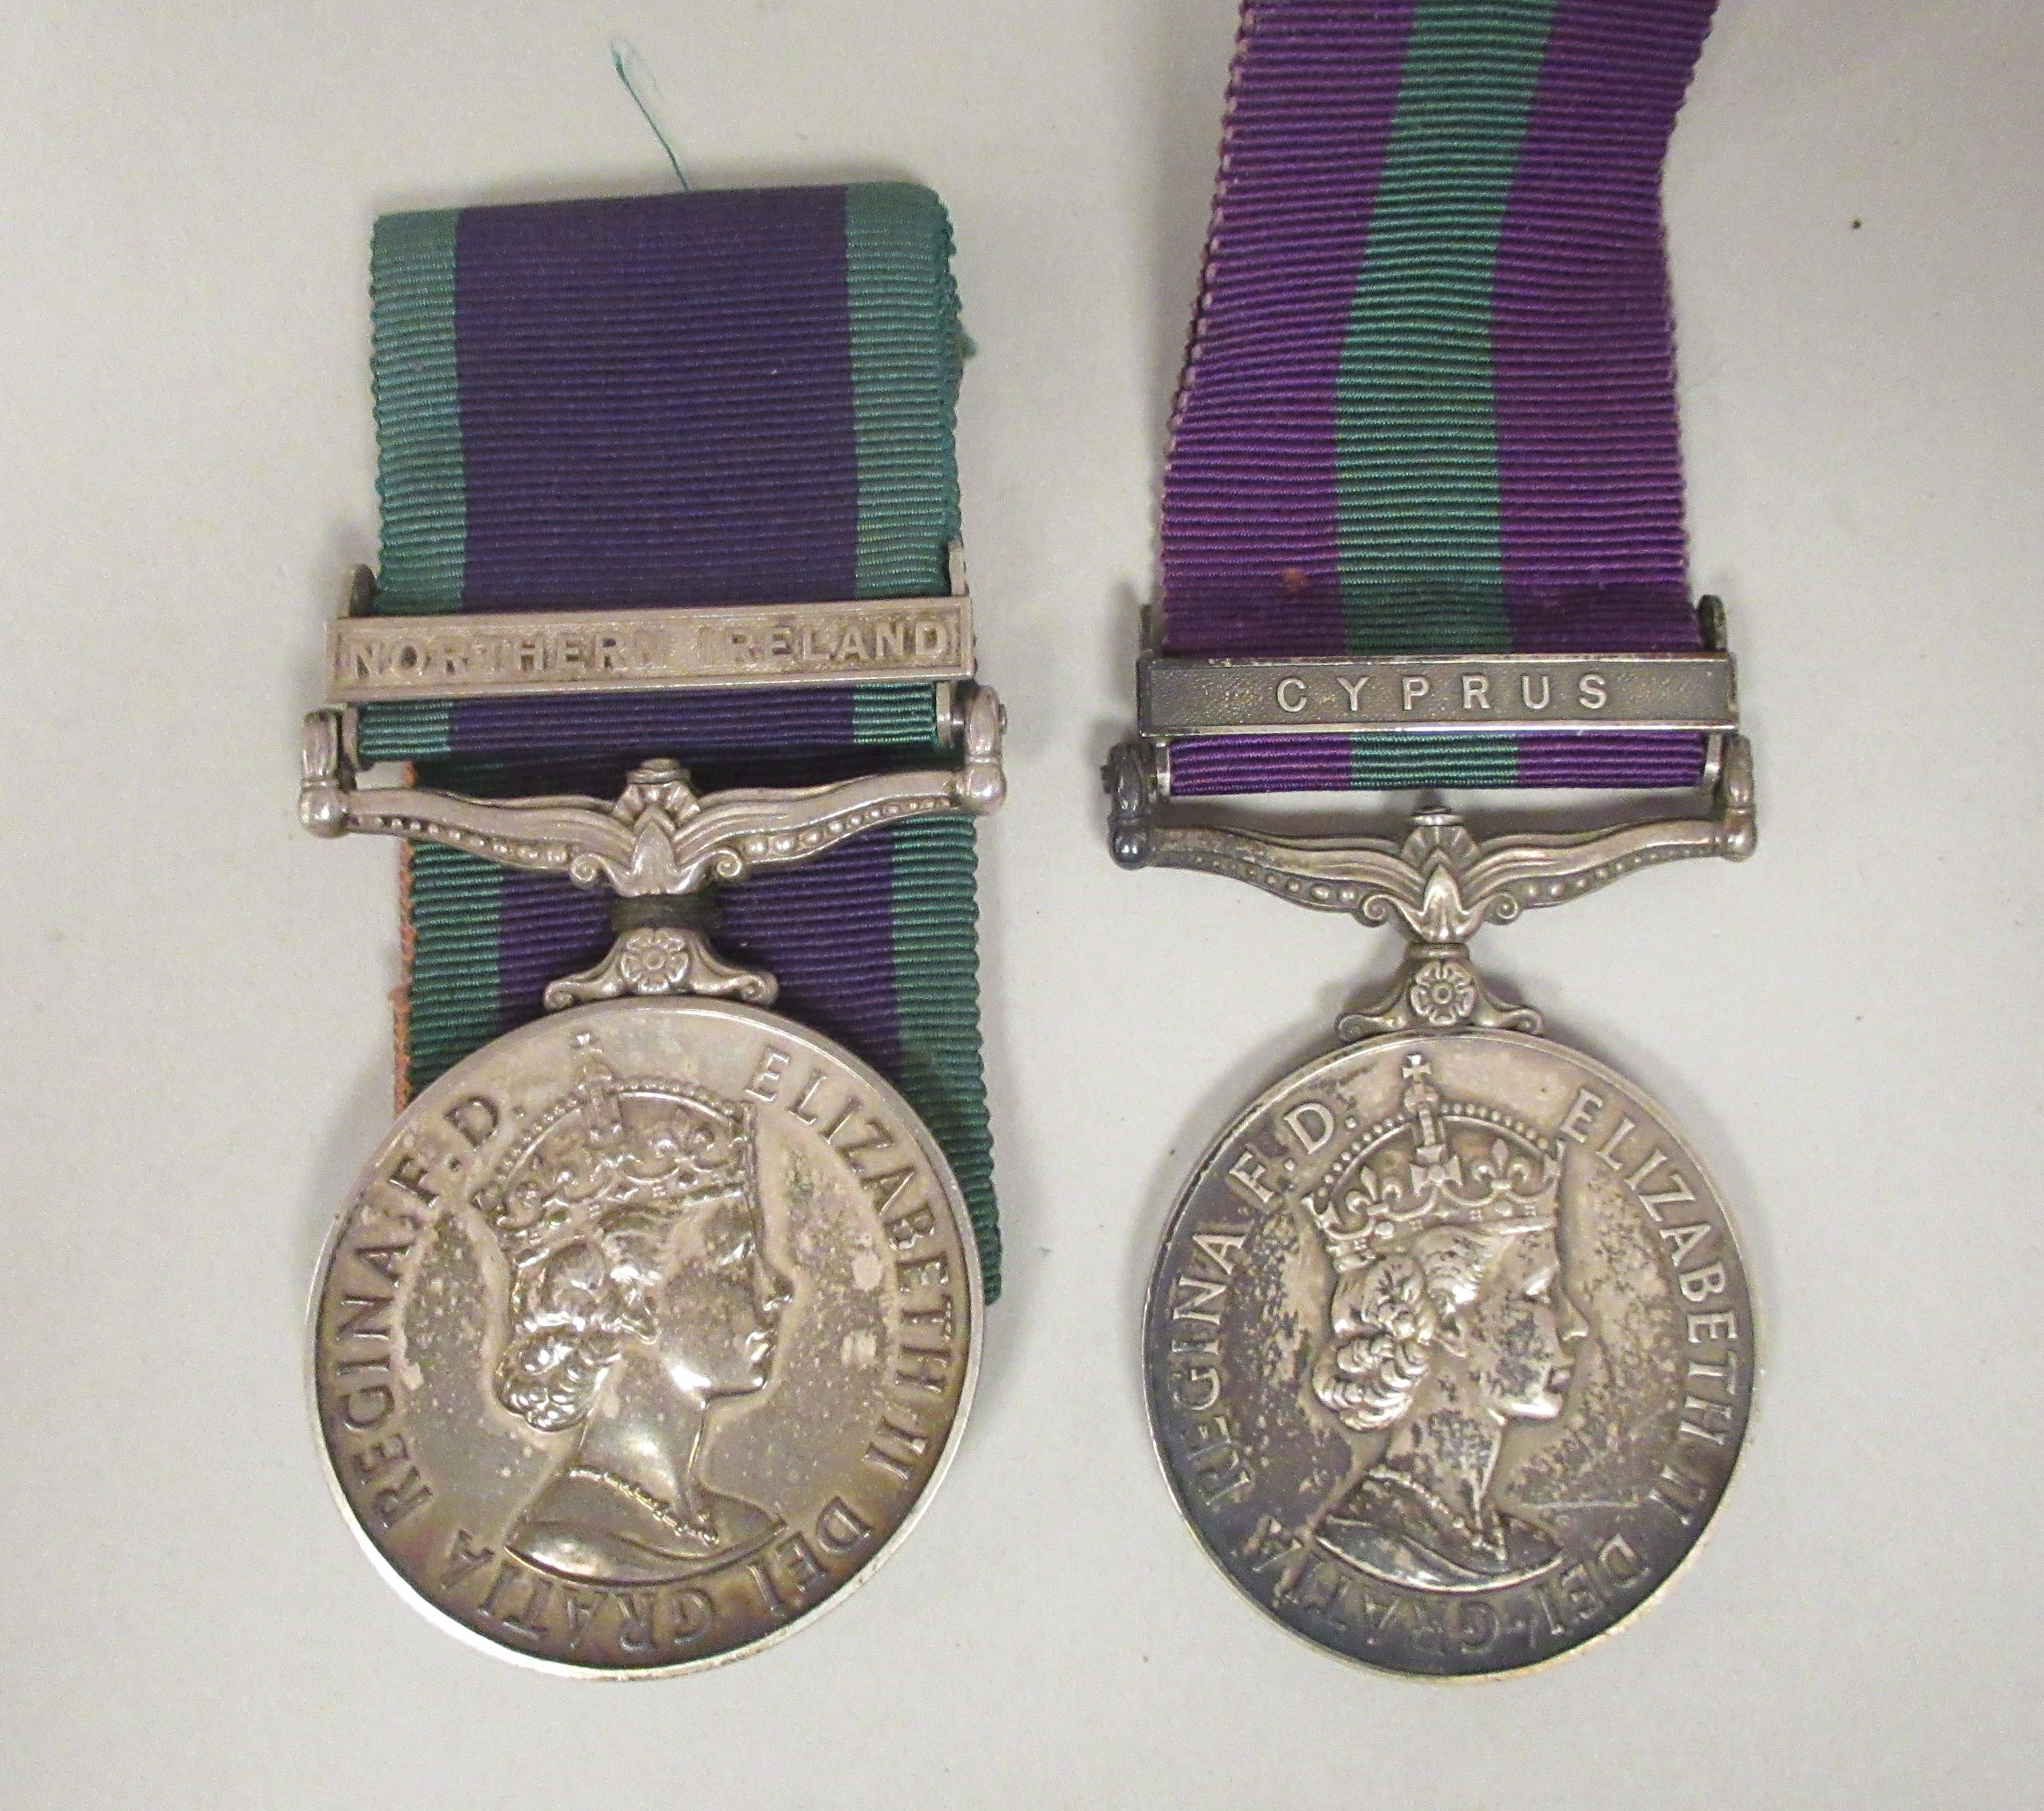 A Queen Elizabeth II General Service medal with a Cyprus bar on the ribbon, inscribed S/23307080 Pte